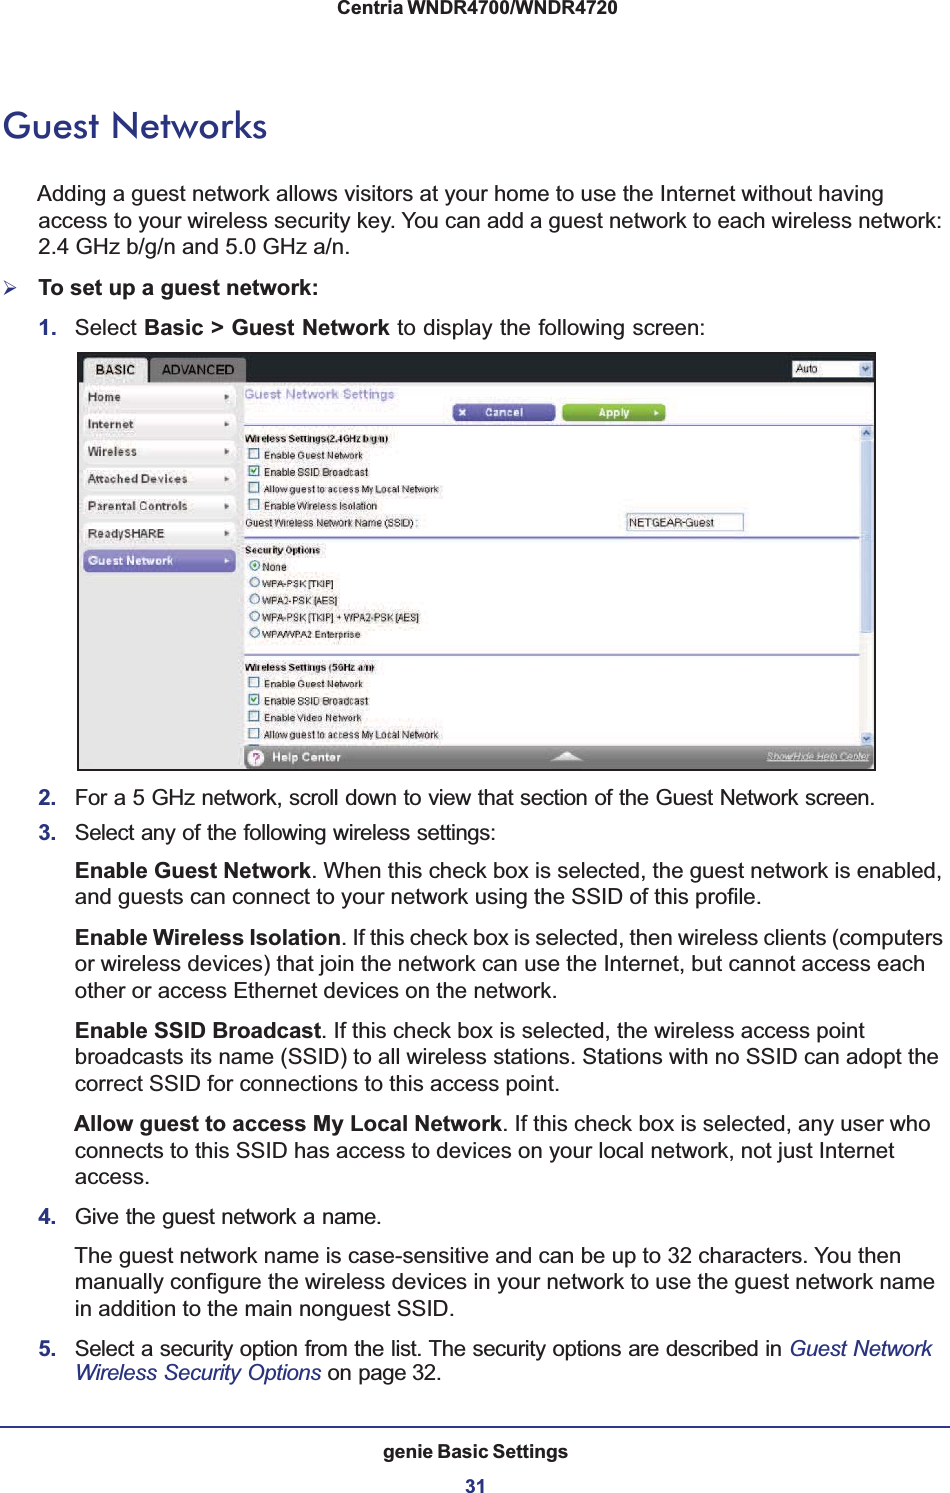 genie Basic Settings31 Centria WNDR4700/WNDR4720Guest NetworksAdding a guest network allows visitors at your home to use the Internet without having access to your wireless security key. You can add a guest network to each wireless network: 2.4 GHz b/g/n and 5.0 GHz a/n. ¾To set up a guest network:1. Select Basic &gt; Guest Network to display the following screen:2. For a 5 GHz network, scroll down to view that section of the Guest Network screen.3. Select any of the following wireless settings:Enable Guest Network. When this check box is selected, the guest network is enabled, and guests can connect to your network using the SSID of this profile.Enable Wireless Isolation. If this check box is selected, then wireless clients (computers or wireless devices) that join the network can use the Internet, but cannot access each other or access Ethernet devices on the network.Enable SSID Broadcast. If this check box is selected, the wireless access point broadcasts its name (SSID) to all wireless stations. Stations with no SSID can adopt the correct SSID for connections to this access point.Allow guest to access My Local Network. If this check box is selected, any user who connects to this SSID has access to devices on your local network, not just Internet access.4. Give the guest network a name.The guest network name is case-sensitive and can be up to 32 characters. You then manually configure the wireless devices in your network to use the guest network name in addition to the main nonguest SSID. 5. Select a security option from the list. The security options are described in Guest Network Wireless Security Options on page 32.